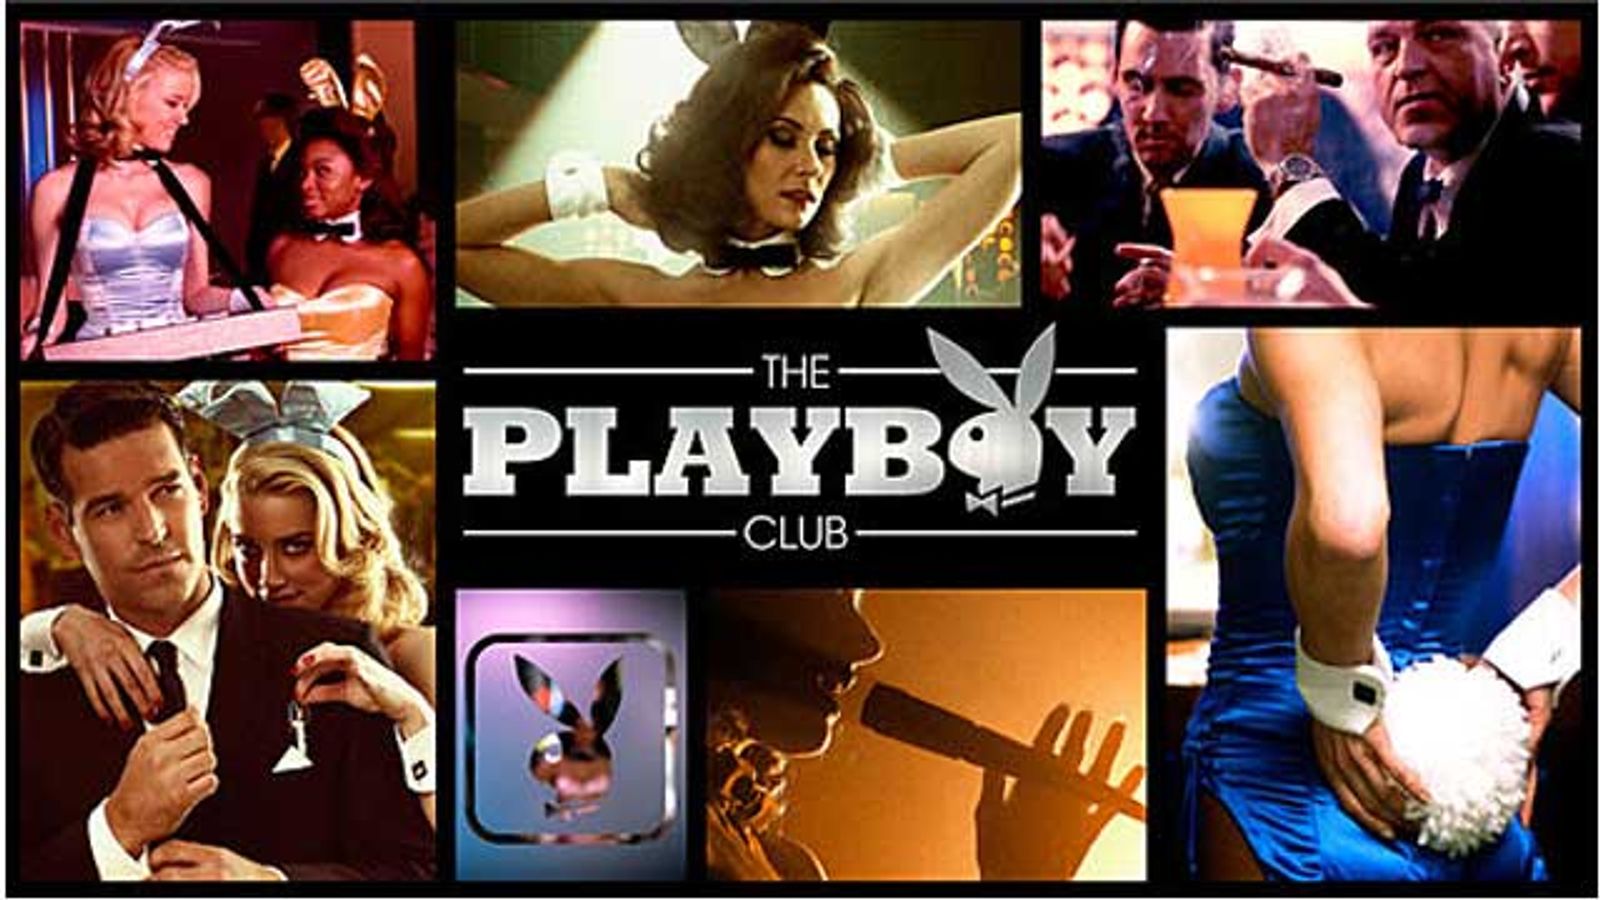 Parents Television Council Joins War on 'The Playboy Club'